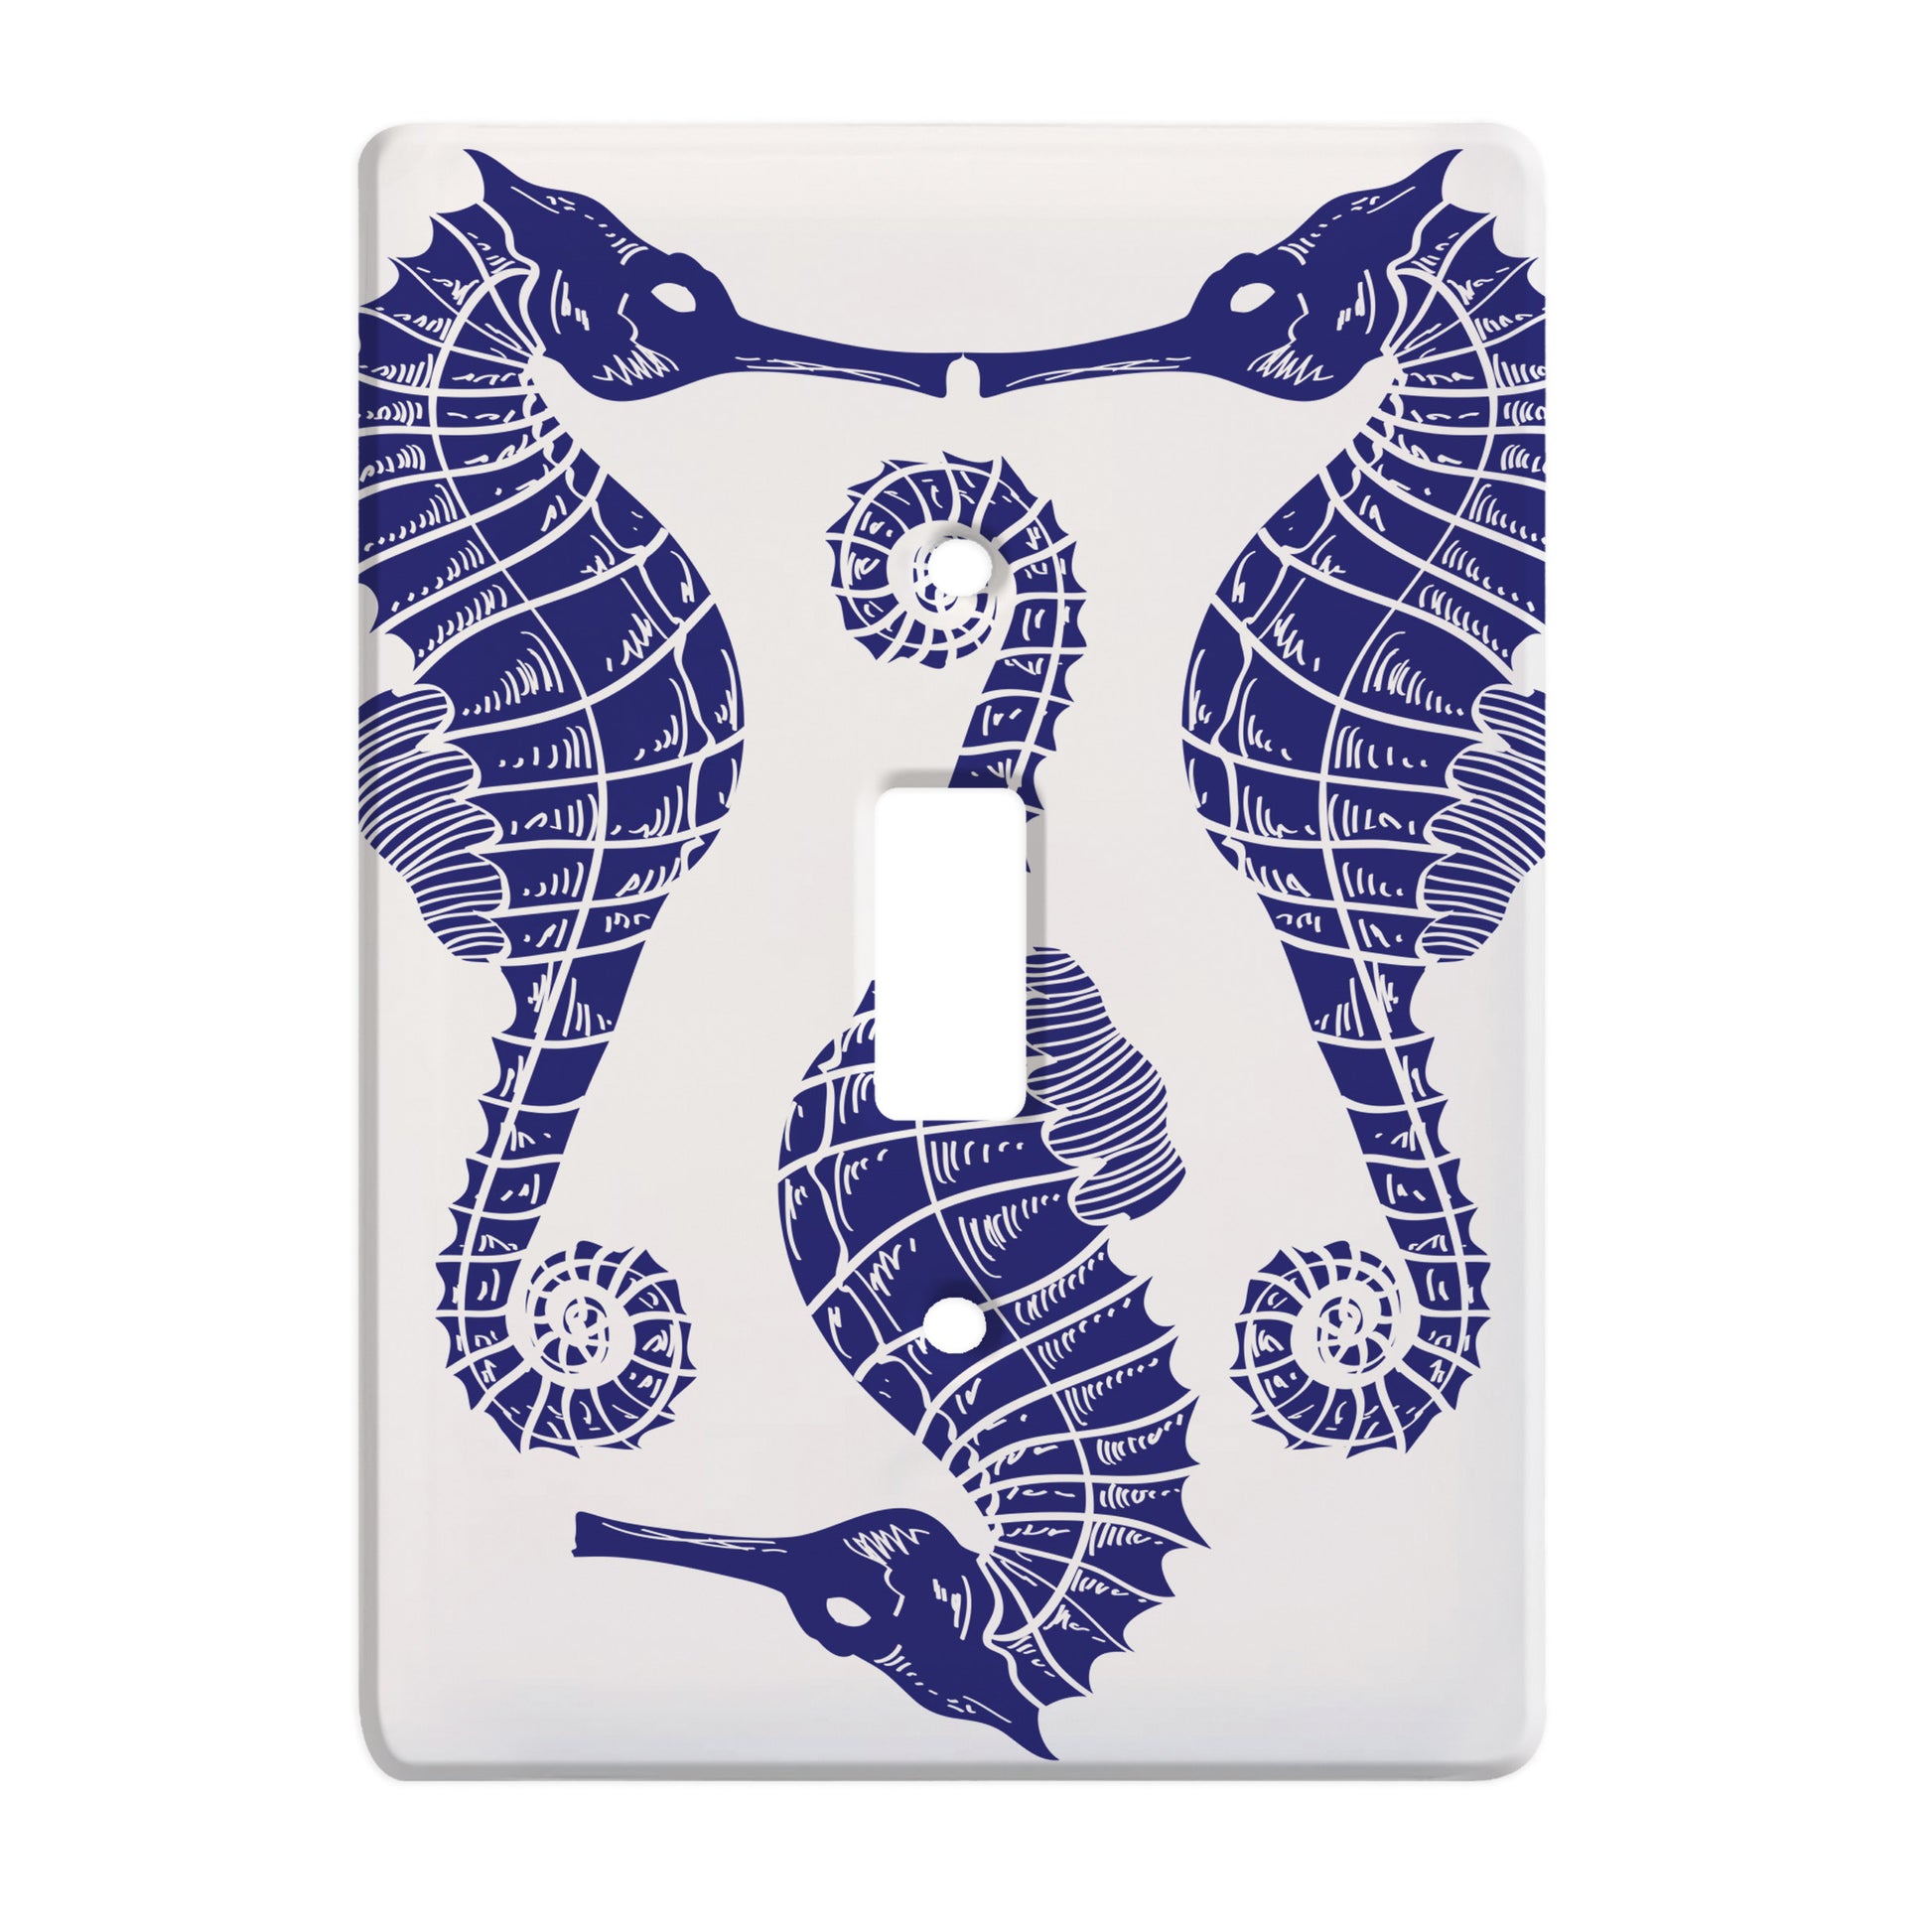 ceramic white single toggle switch plate featuring alternating blue seahorse pattern.